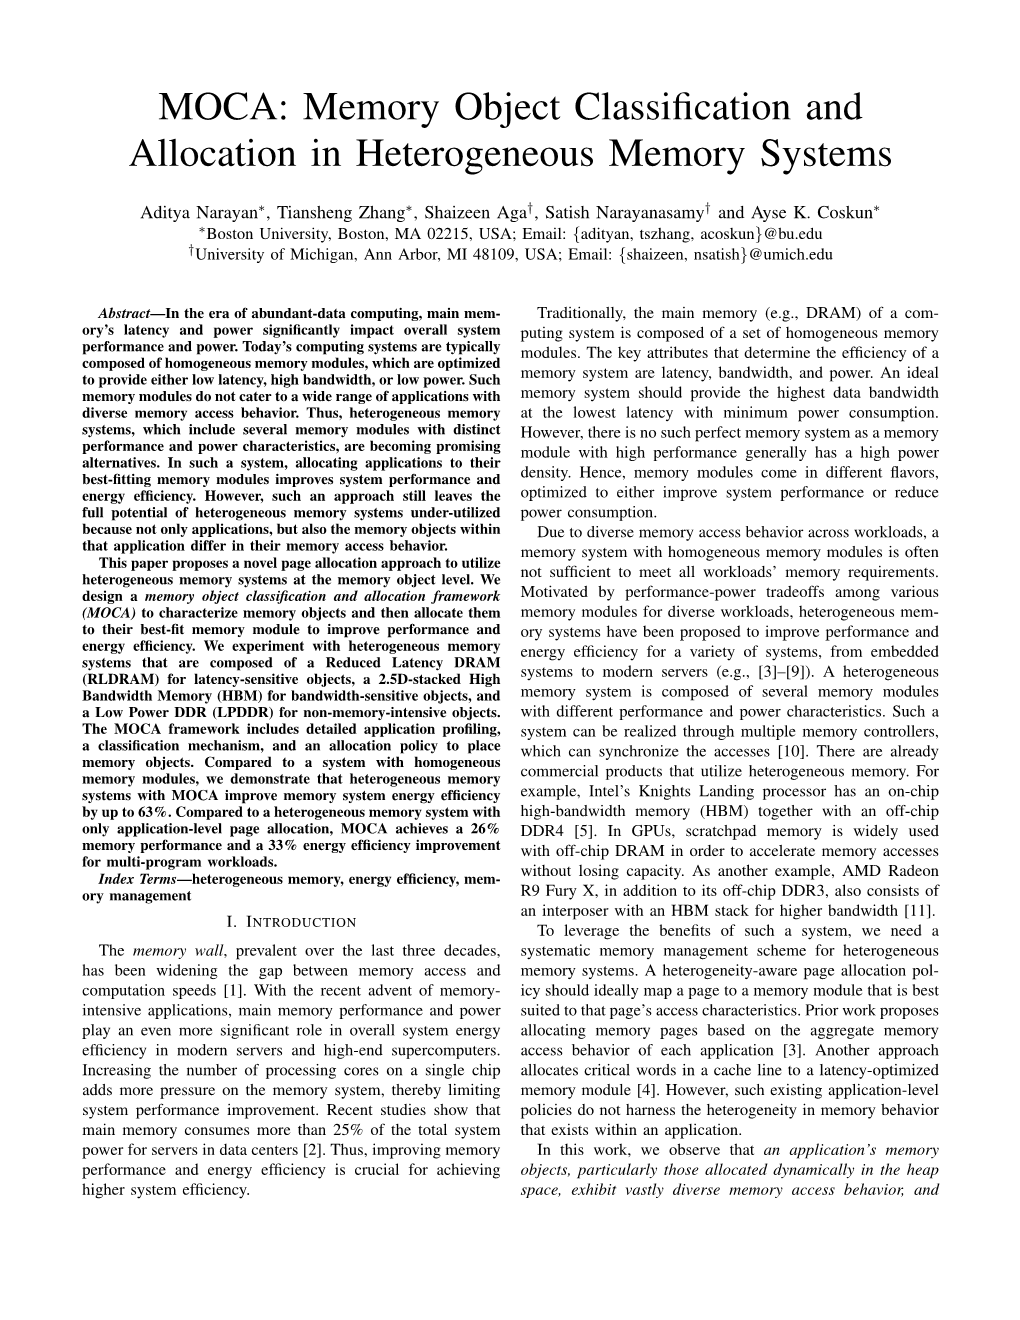 MOCA: Memory Object Classiﬁcation and Allocation in Heterogeneous Memory Systems